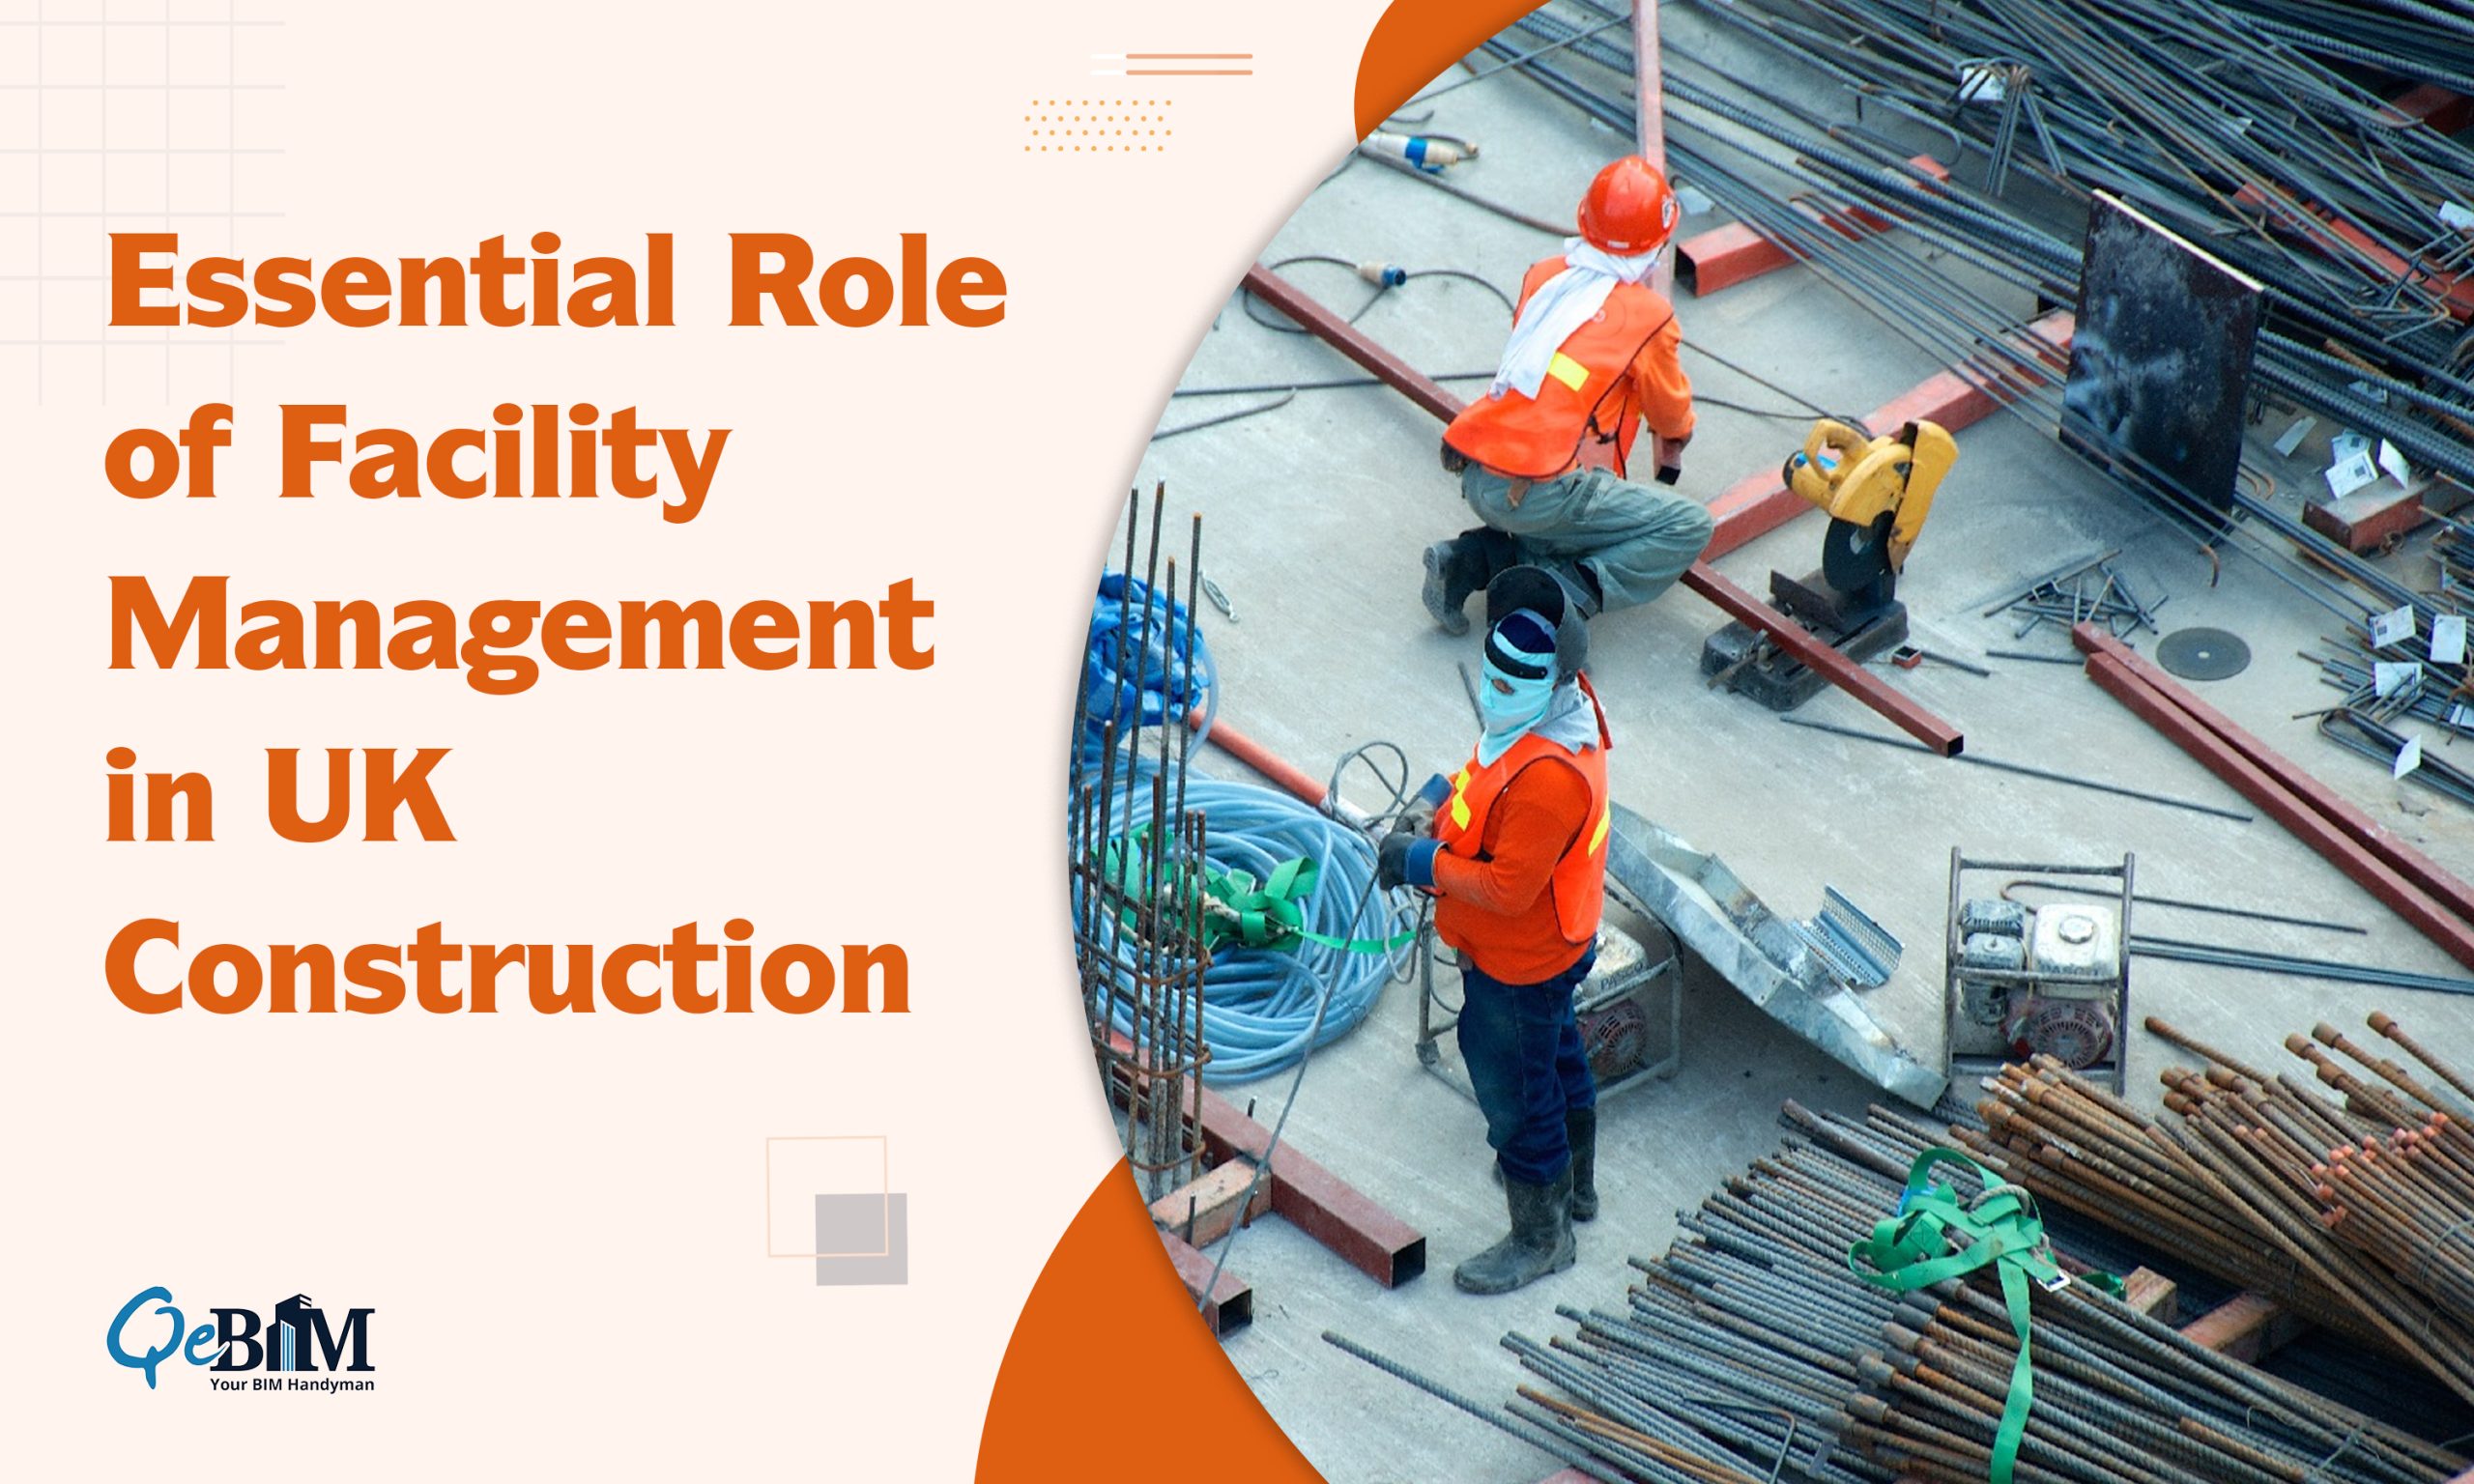 The Essential Role of Facility Management in UK Construction